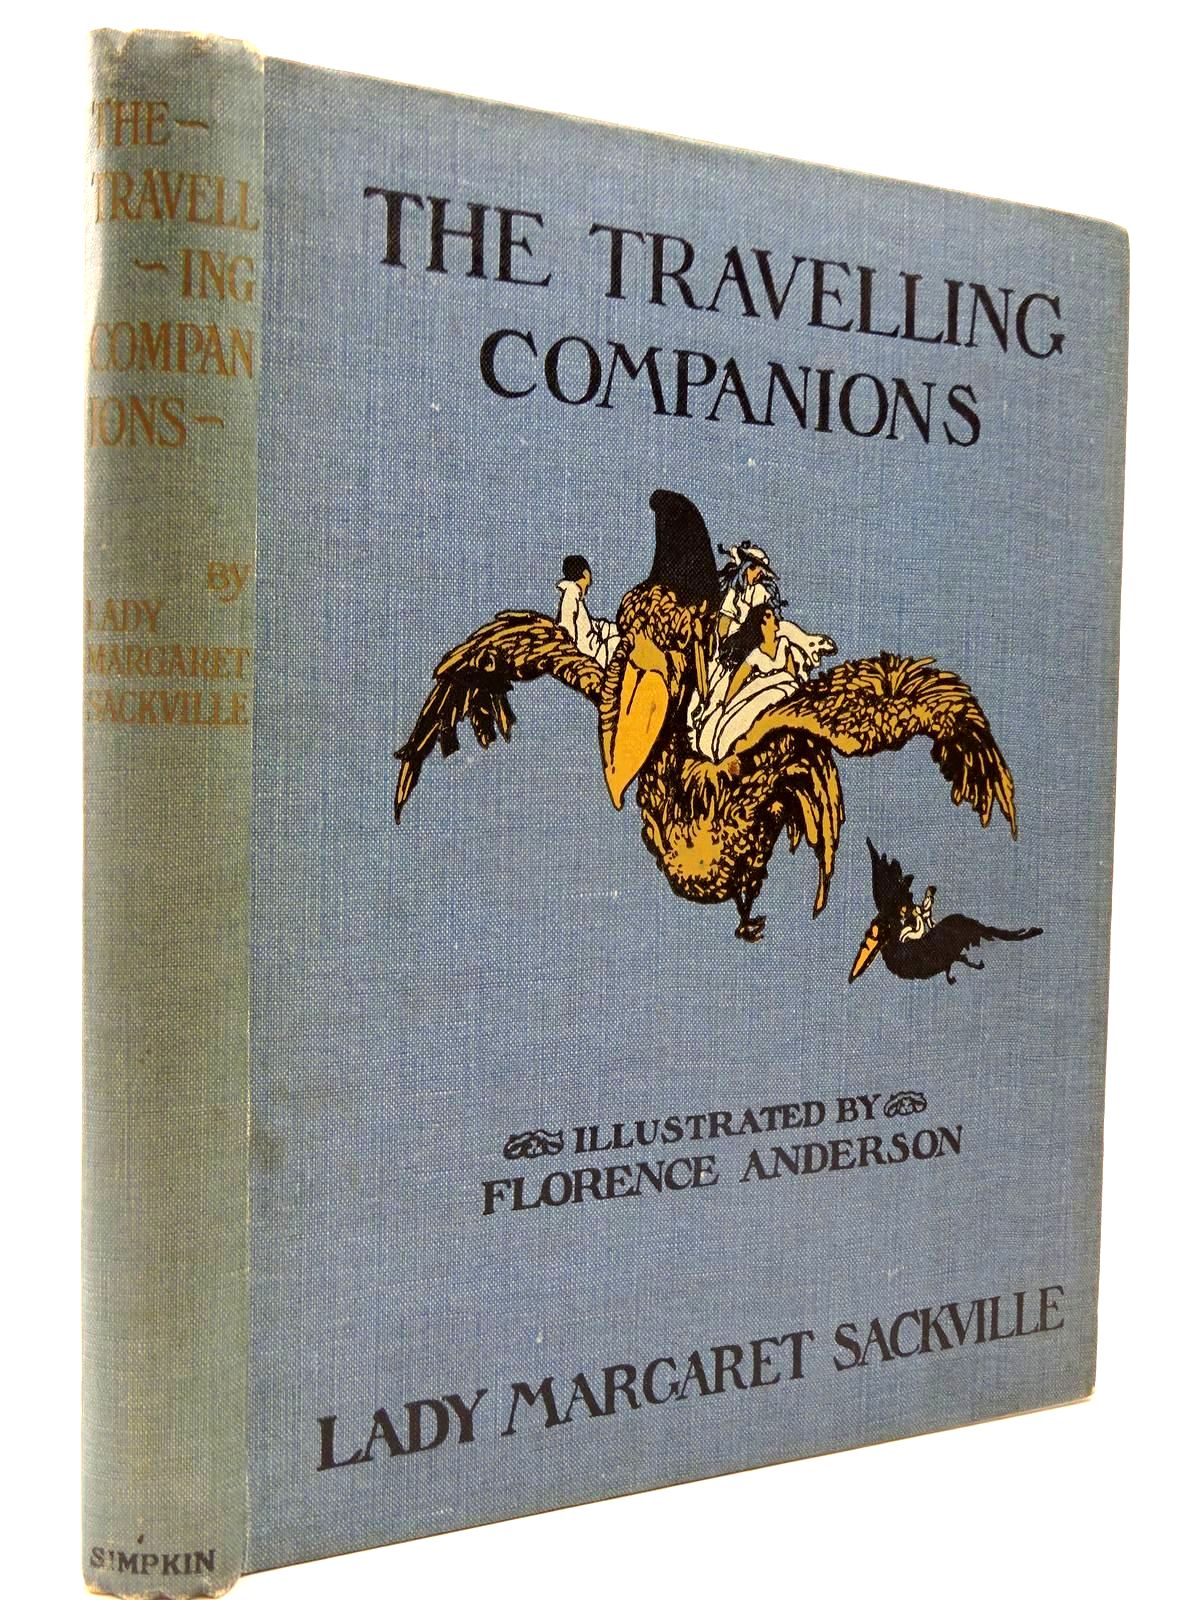 The Sackett Companion: The Facts Behind the Fiction — WHISTLESTOP BOOKSHOP